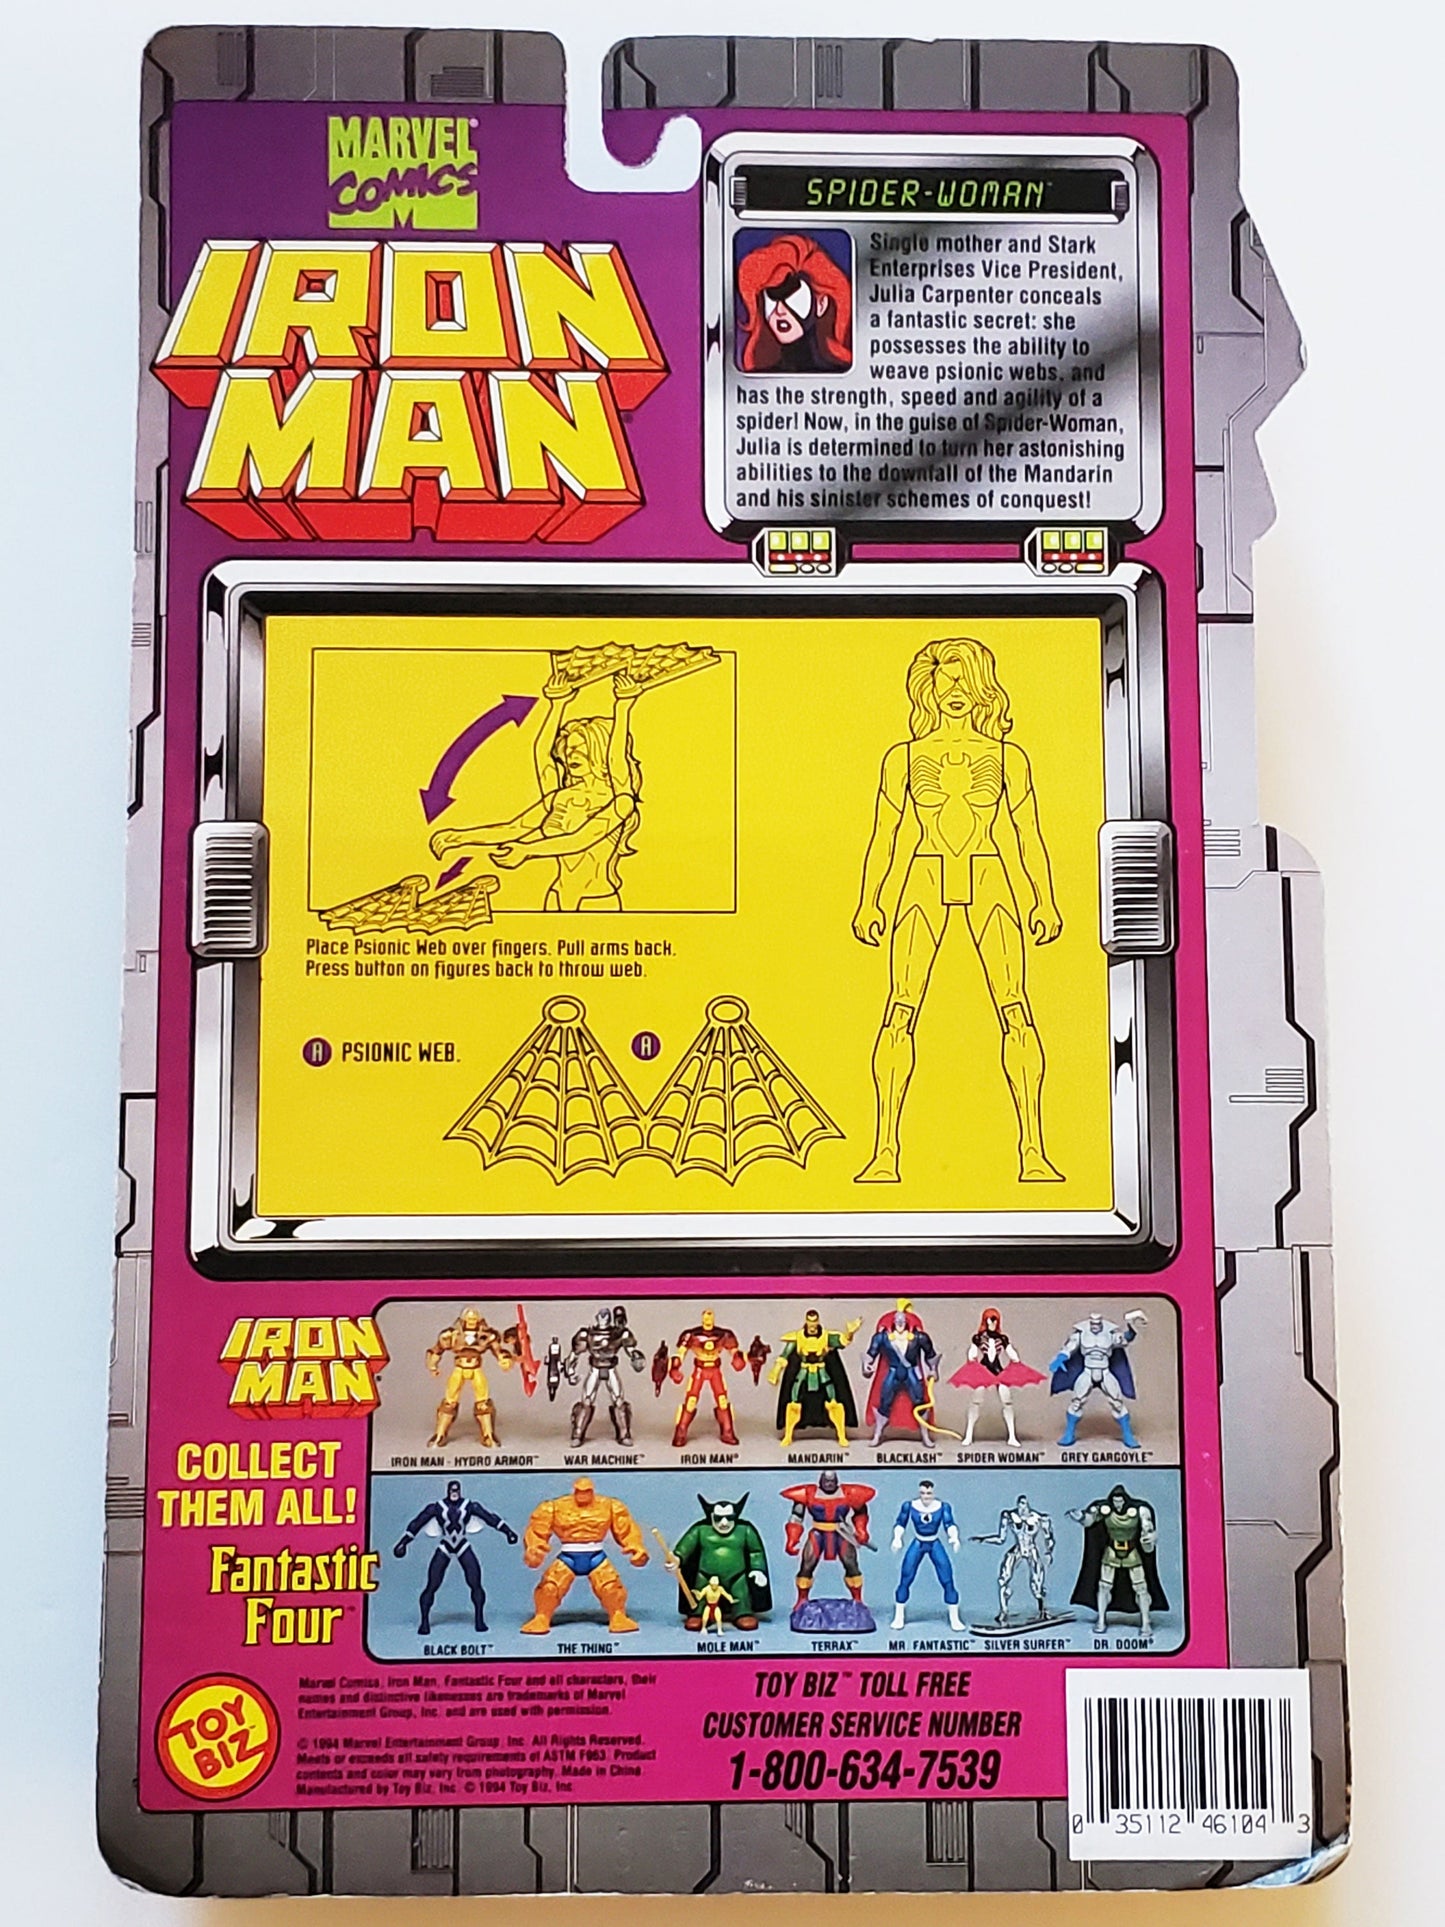 Spider-Woman Action Figure from the Iron Man Series